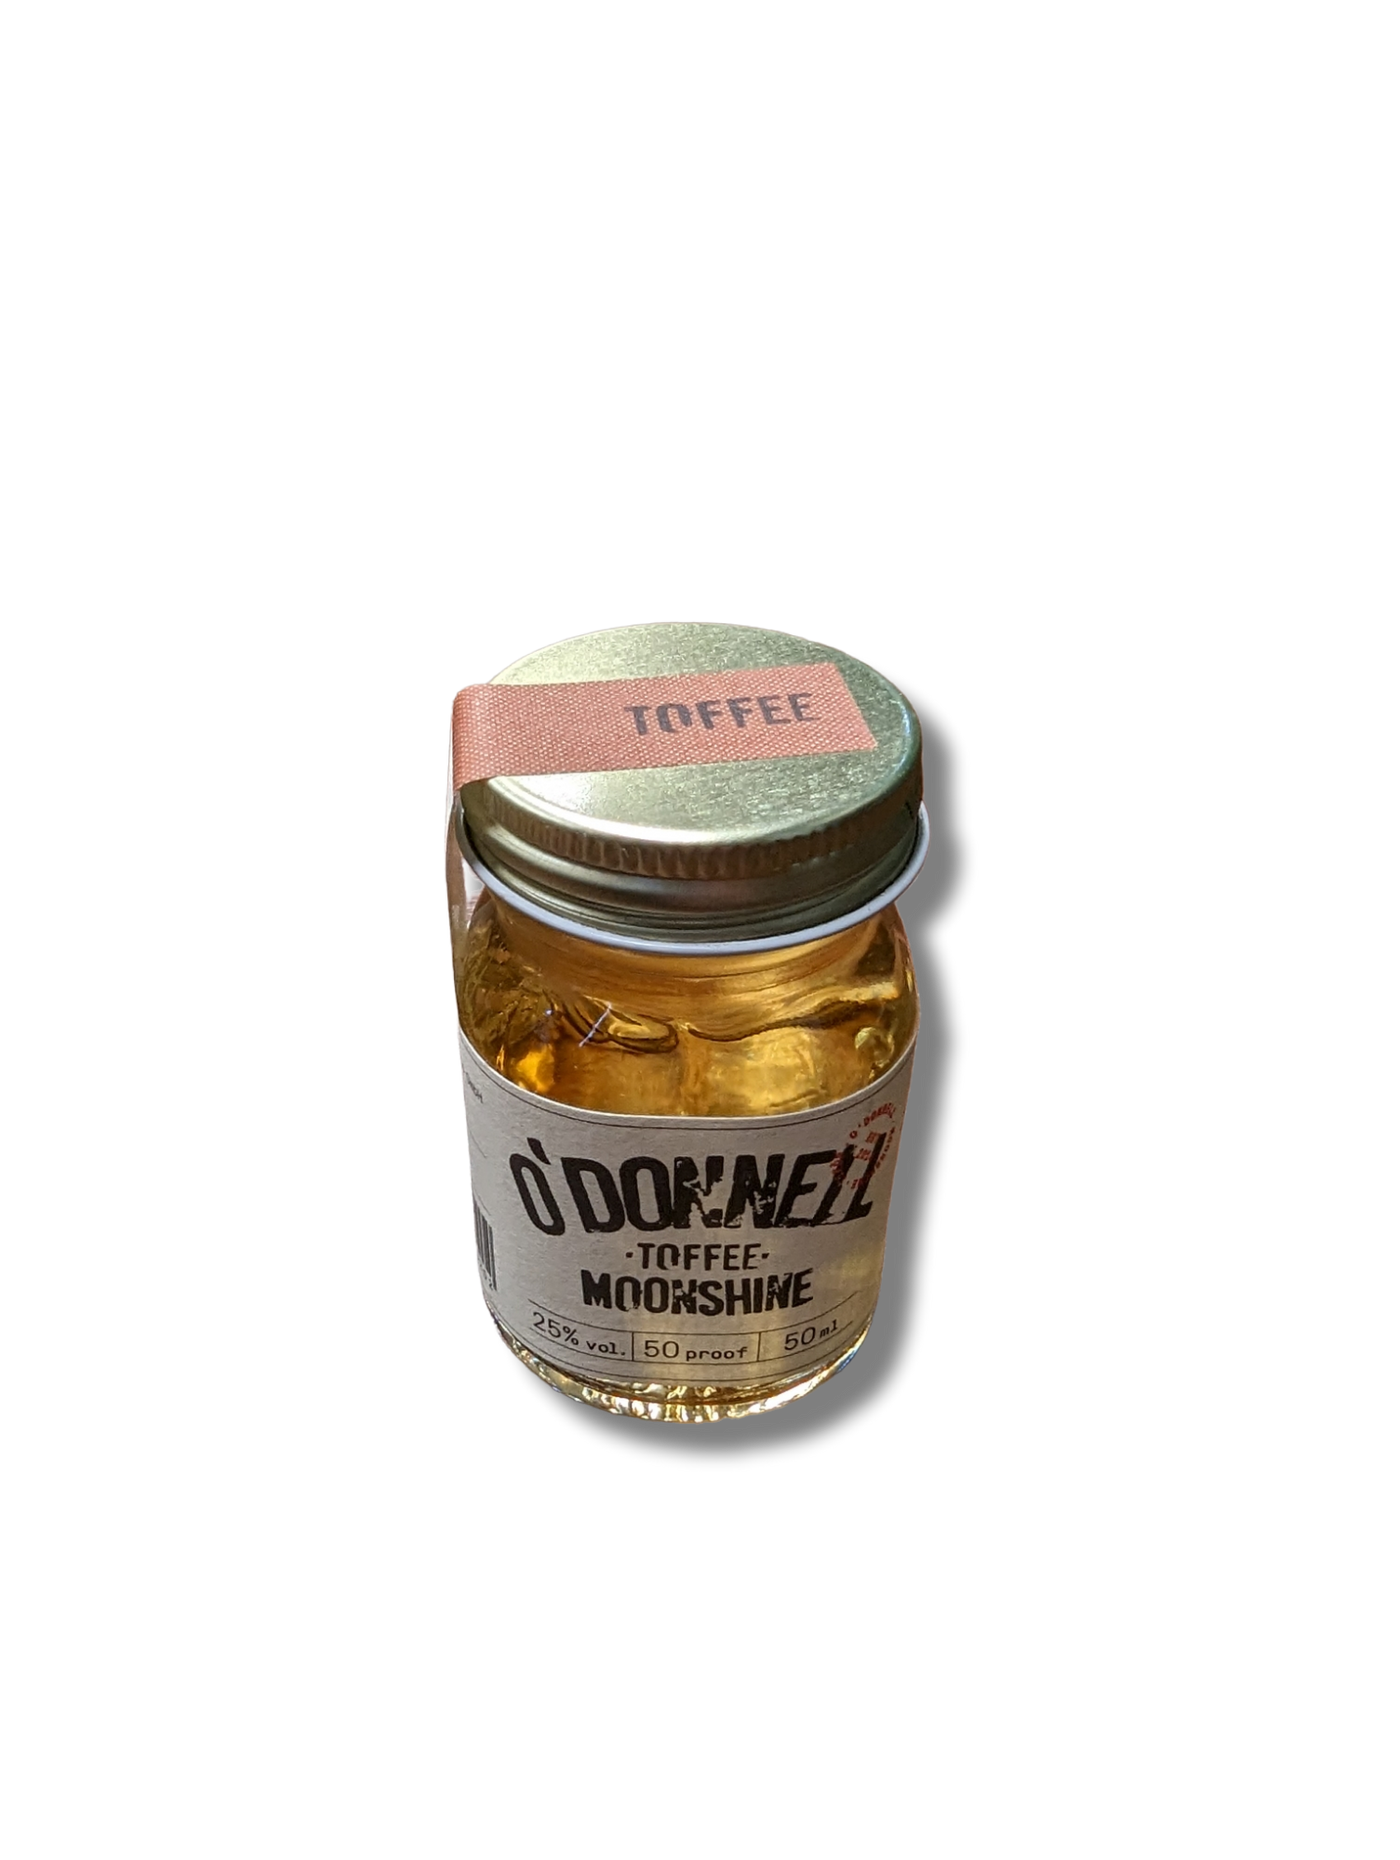 O´Donnell Moonshiner "Toffee Mini"